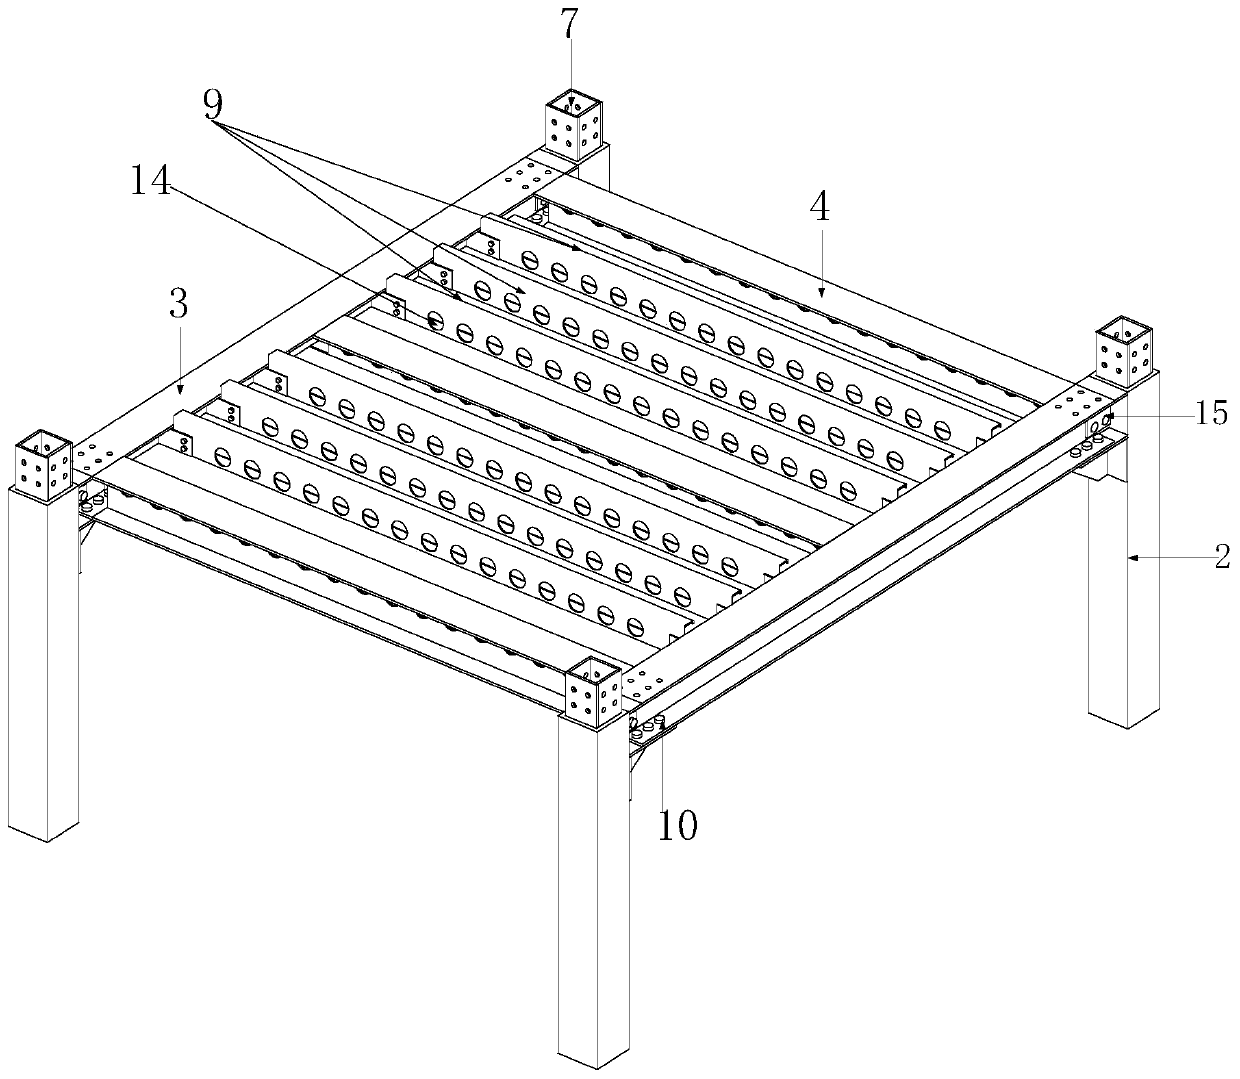 Assembled building system based on inner insertion plate and clamping plate connecting beam column nodes